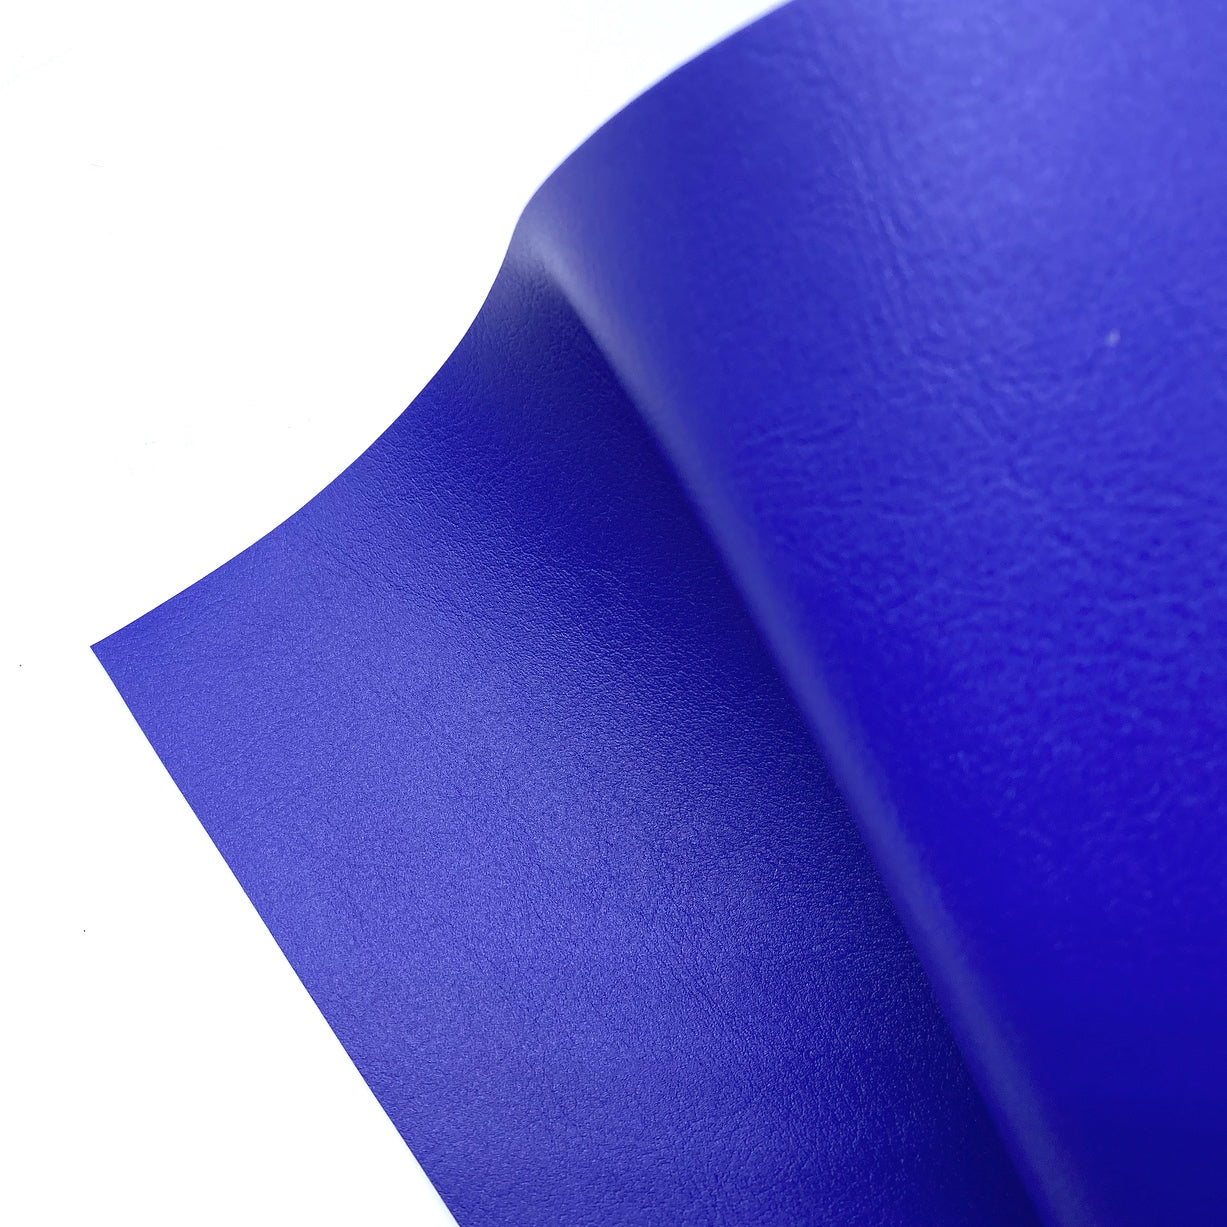 Royally Blue Core Premium Faux Leather Fabric Sheets